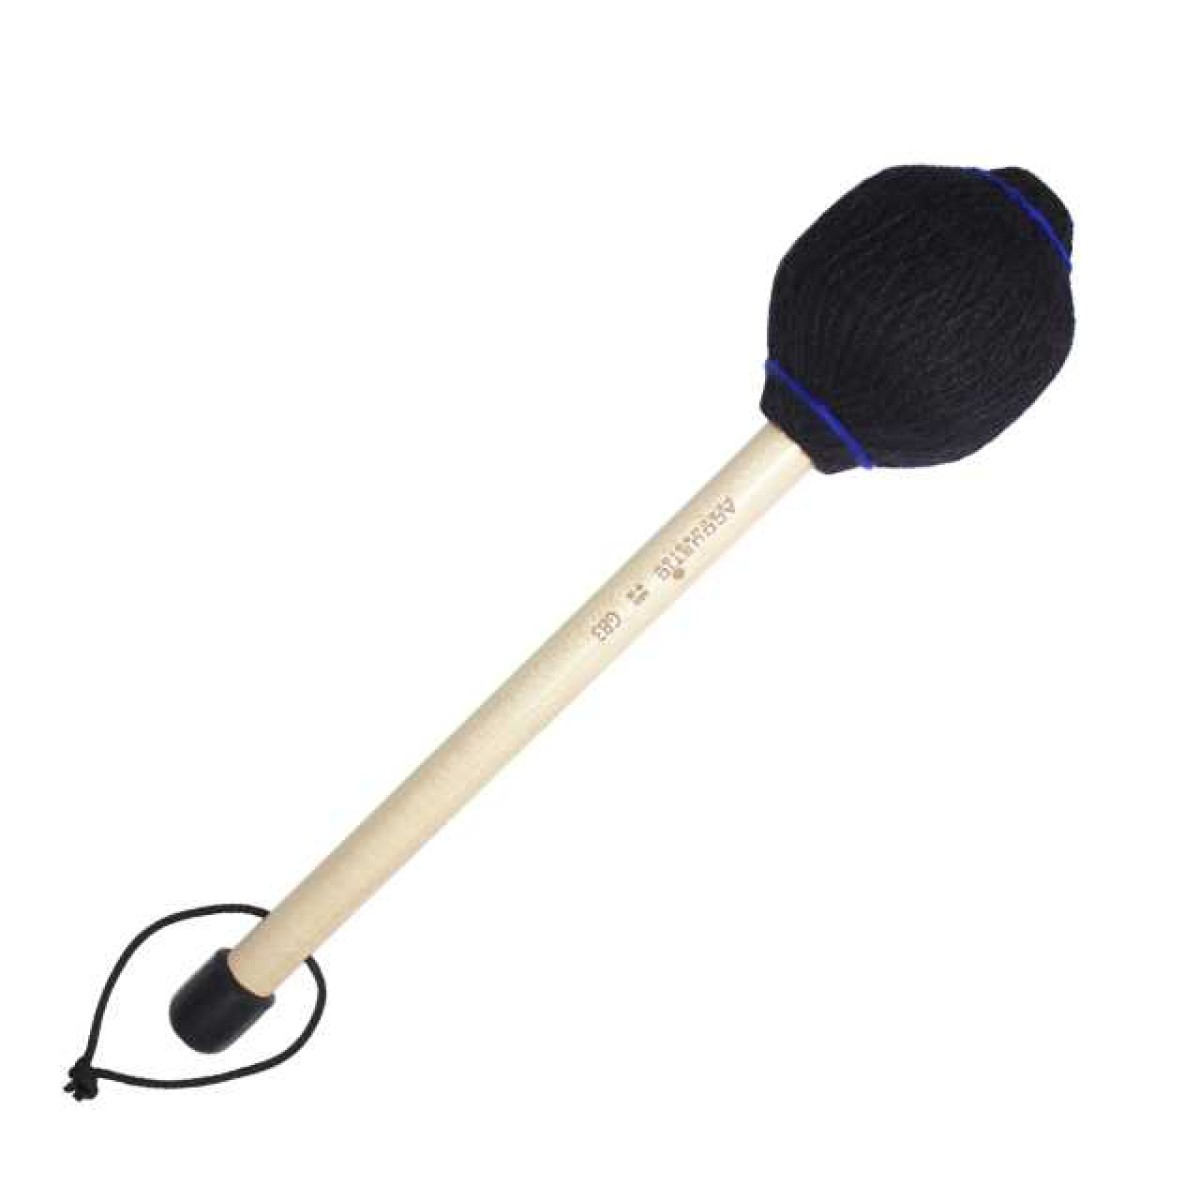 Acoustic Percussion GB3 Heavy Gong Mallet